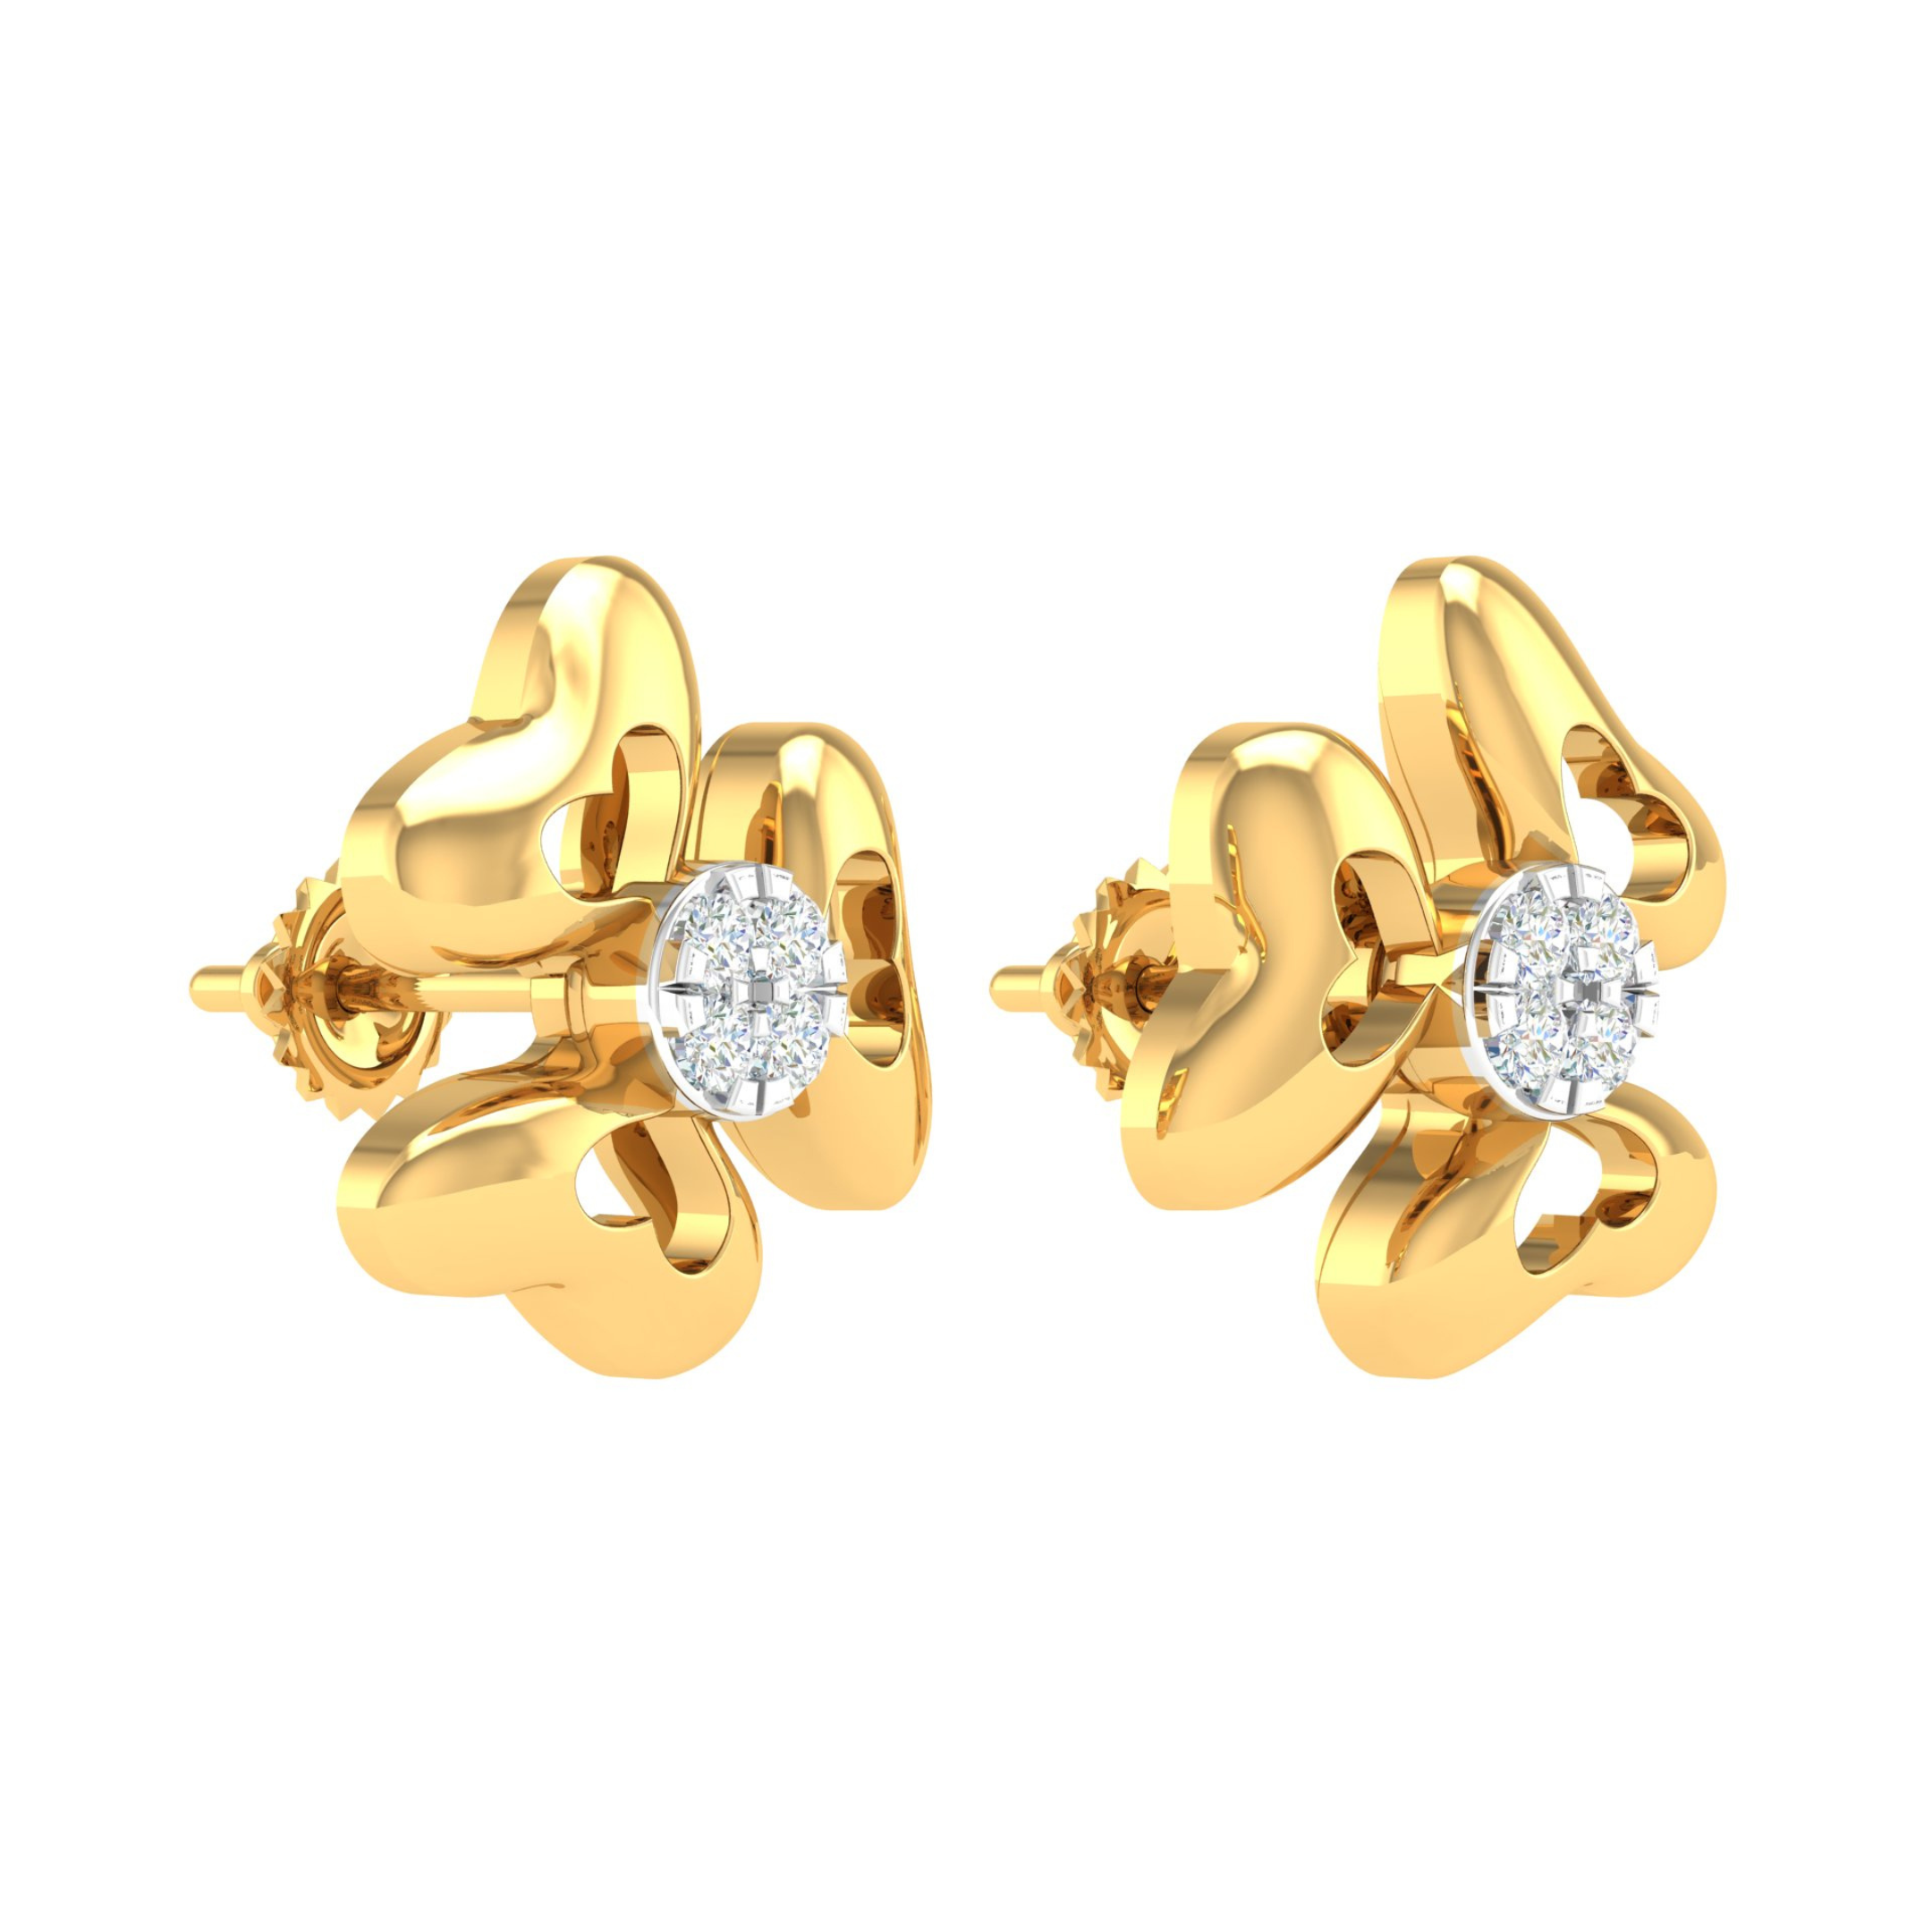 18KT YELLOW GOLD ORCHID BLOSSOM REAL DIAMOND EARRINGS